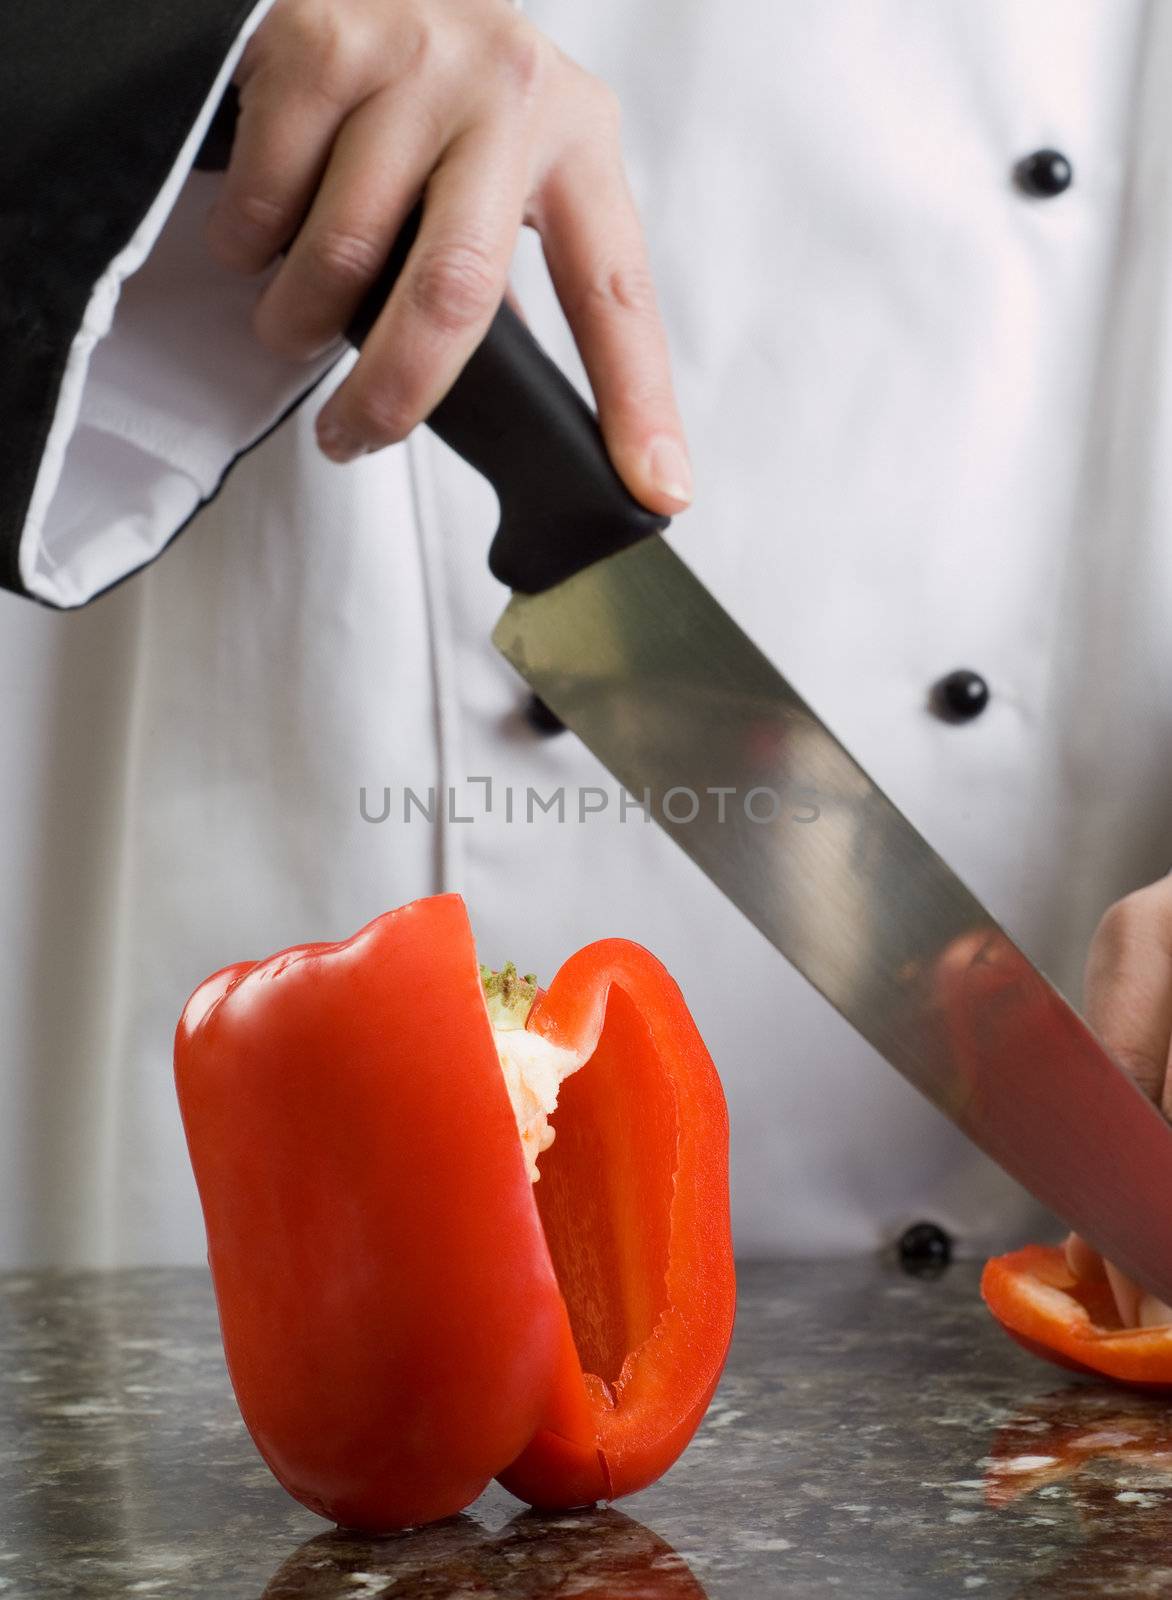 Chef in Black and White Uniform Cutting a Red Pepper Reflecting in Stove Top